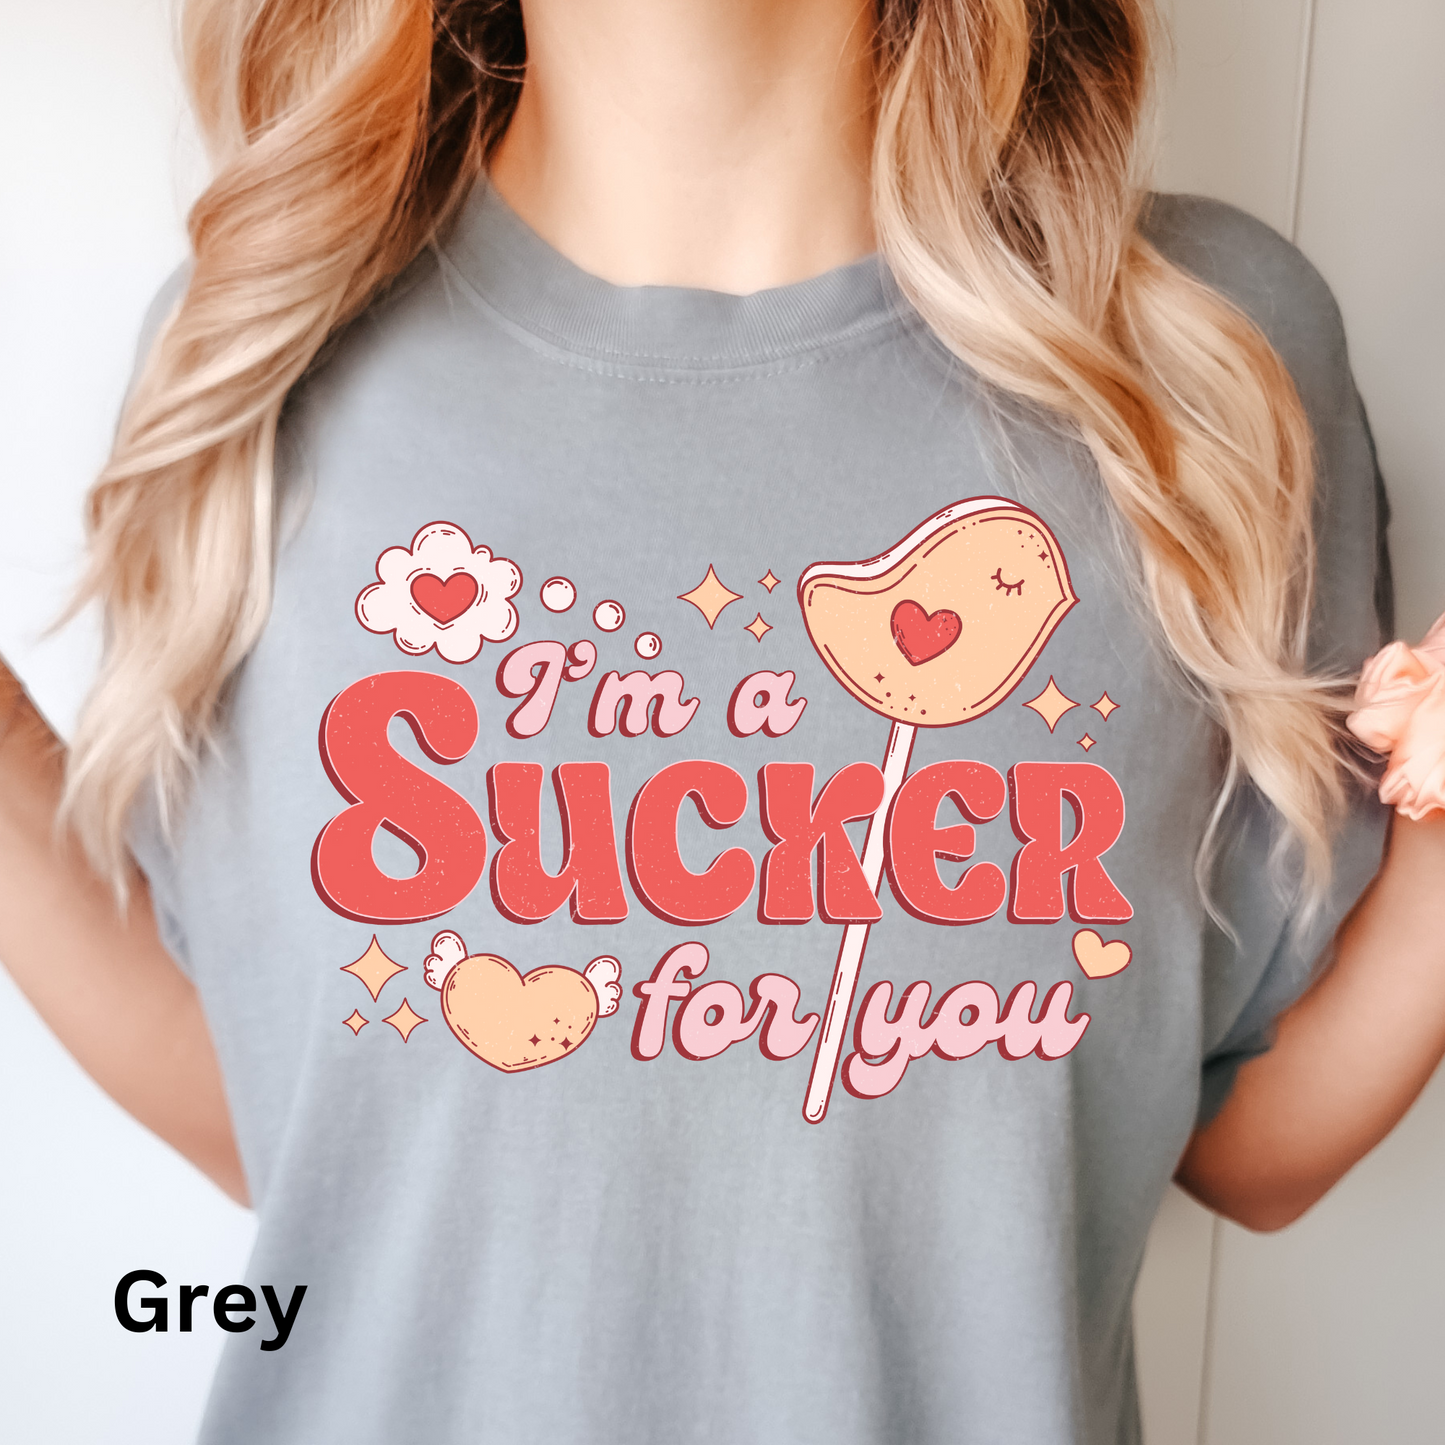 a woman wearing a t - shirt that says i'm a sucker for you